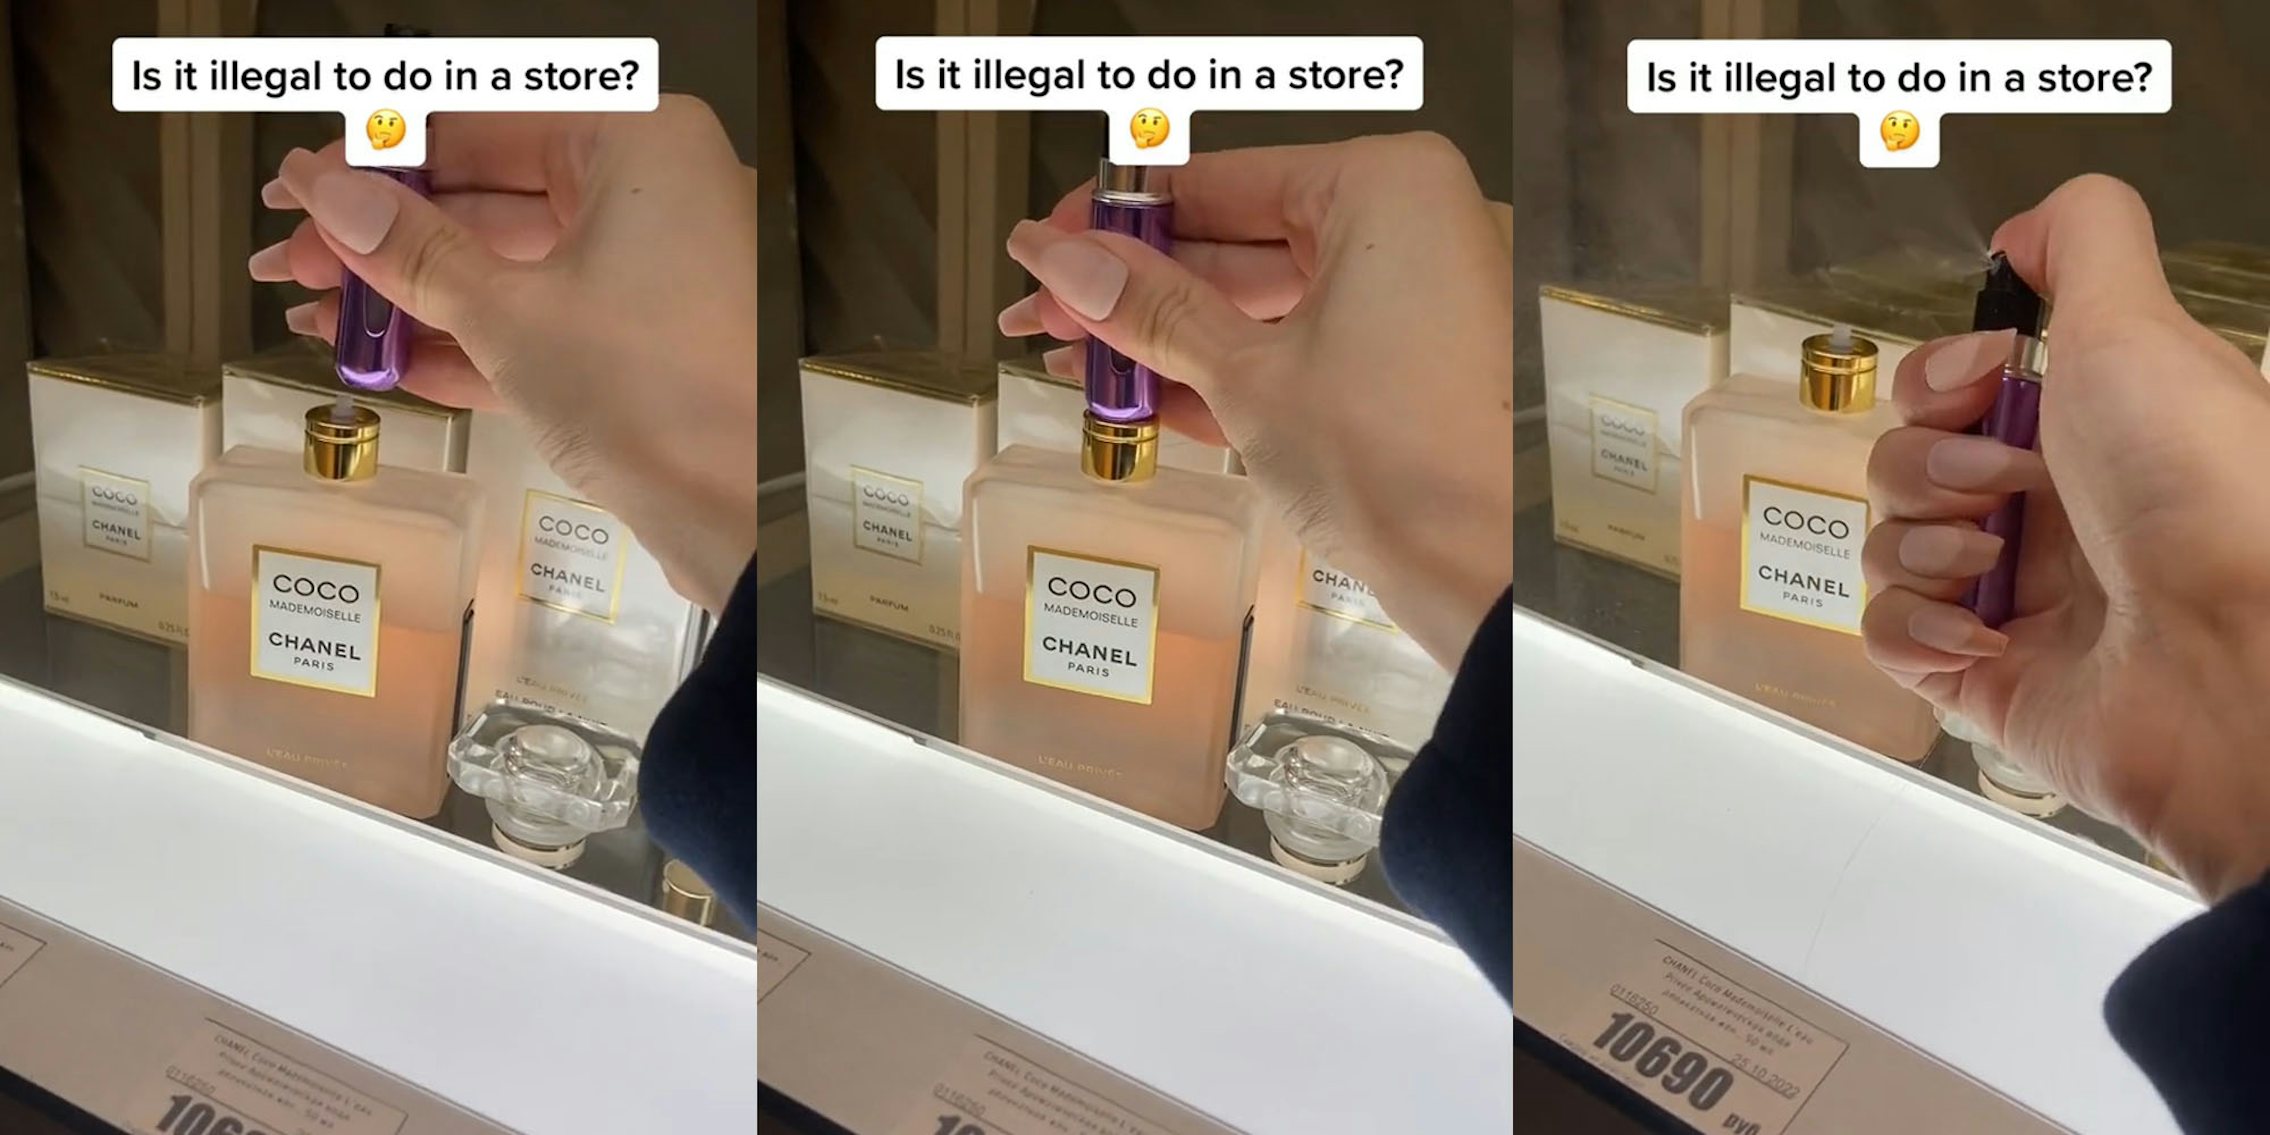 hand with travel perfume container taking some COCO Chanel perfume caption 'Is it illegal to do in store?' (l) hand with travel perfume container hovering over COCO Chanel perfume caption 'Is it illegal to do in store?' (c) hand spraying travel perfume container with COCO Chanel perfume caption 'Is it illegal to do in store?' (r)